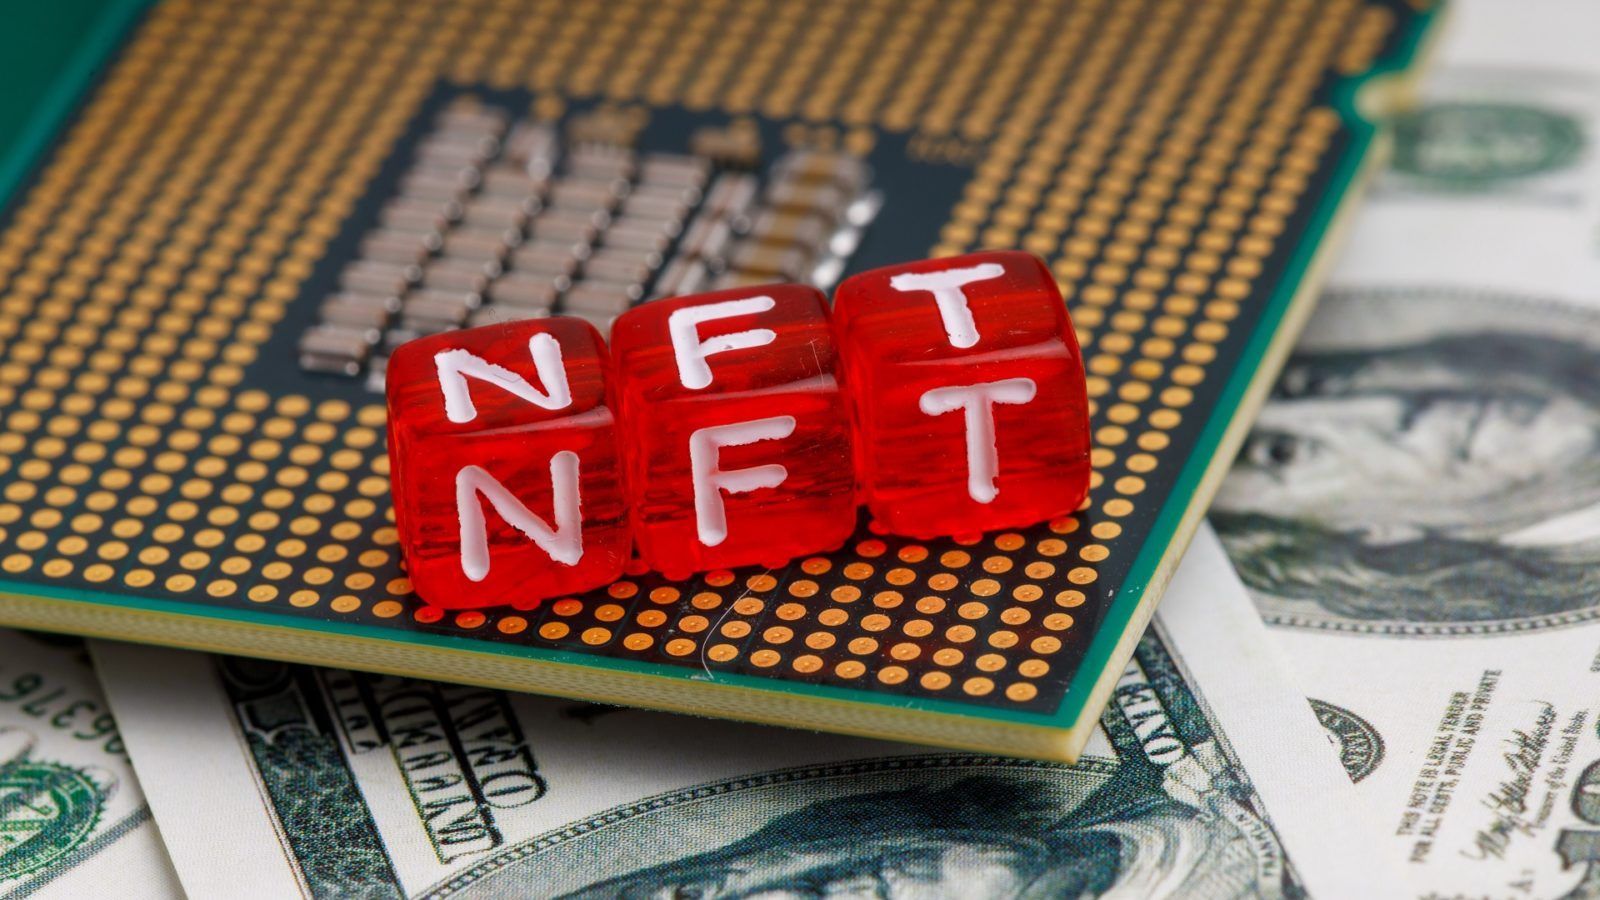 Record US$ 5 billion worth of NFTs sold on OpenSea in January 2022